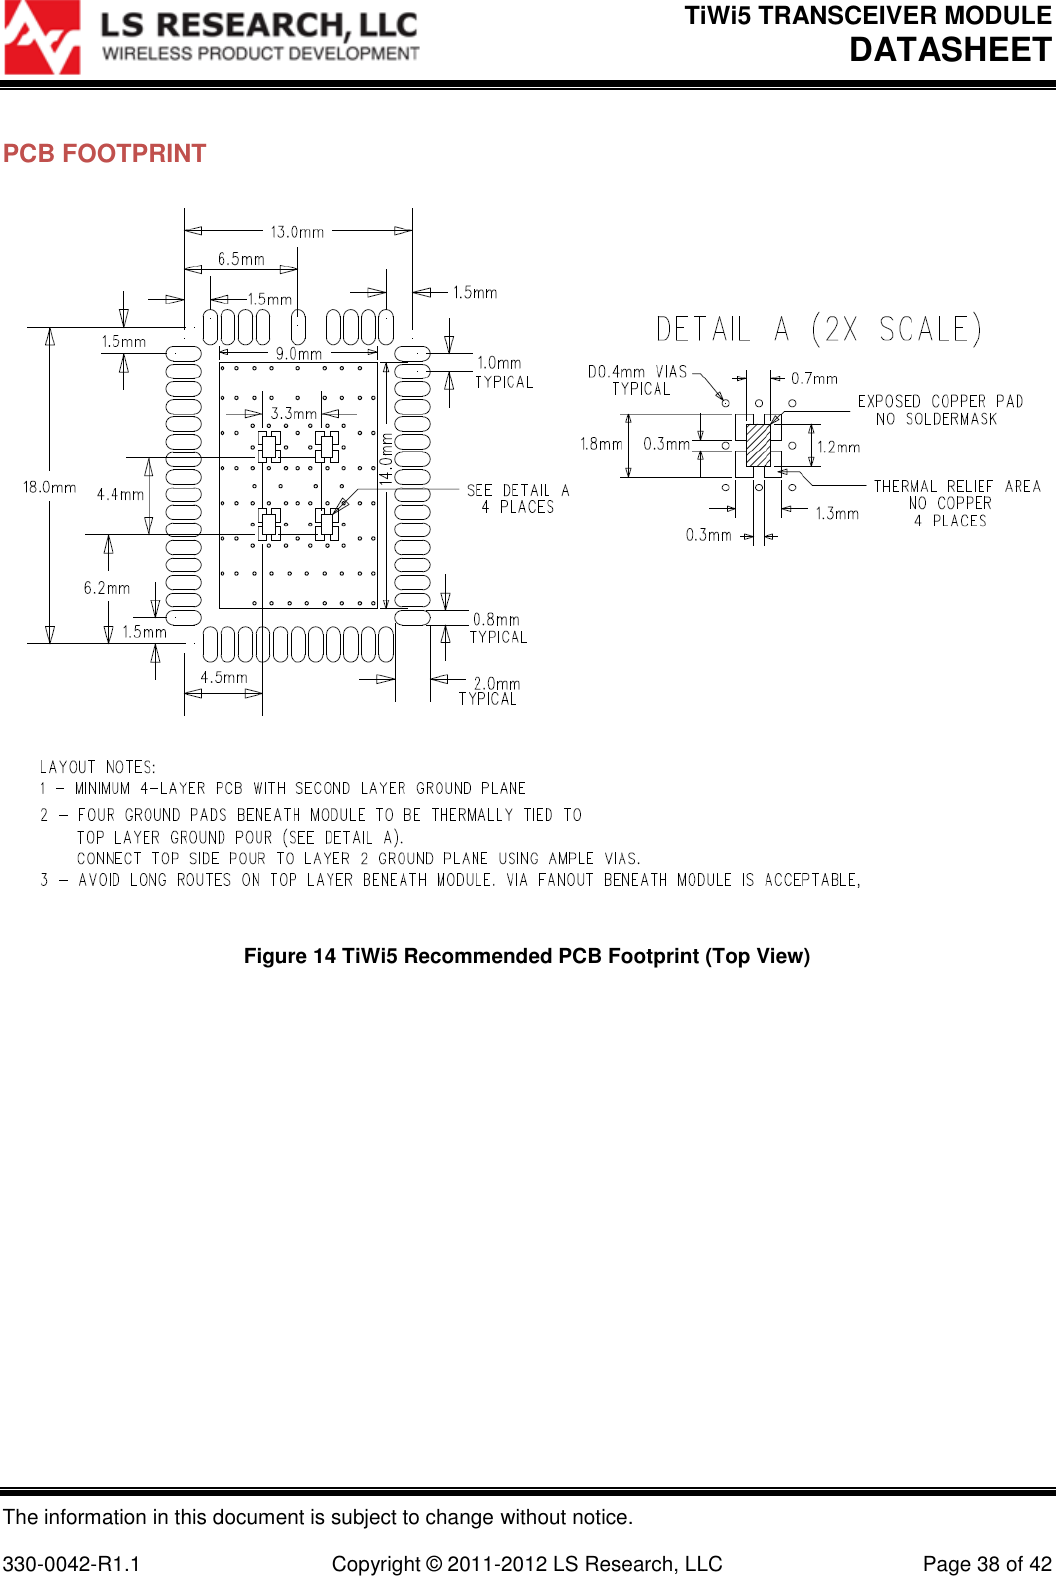 TiWi5 TRANSCEIVER MODULE DATASHEET  The information in this document is subject to change without notice.  330-0042-R1.1    Copyright © 2011-2012 LS Research, LLC  Page 38 of 42 PCB FOOTPRINT       Figure 14 TiWi5 Recommended PCB Footprint (Top View)    